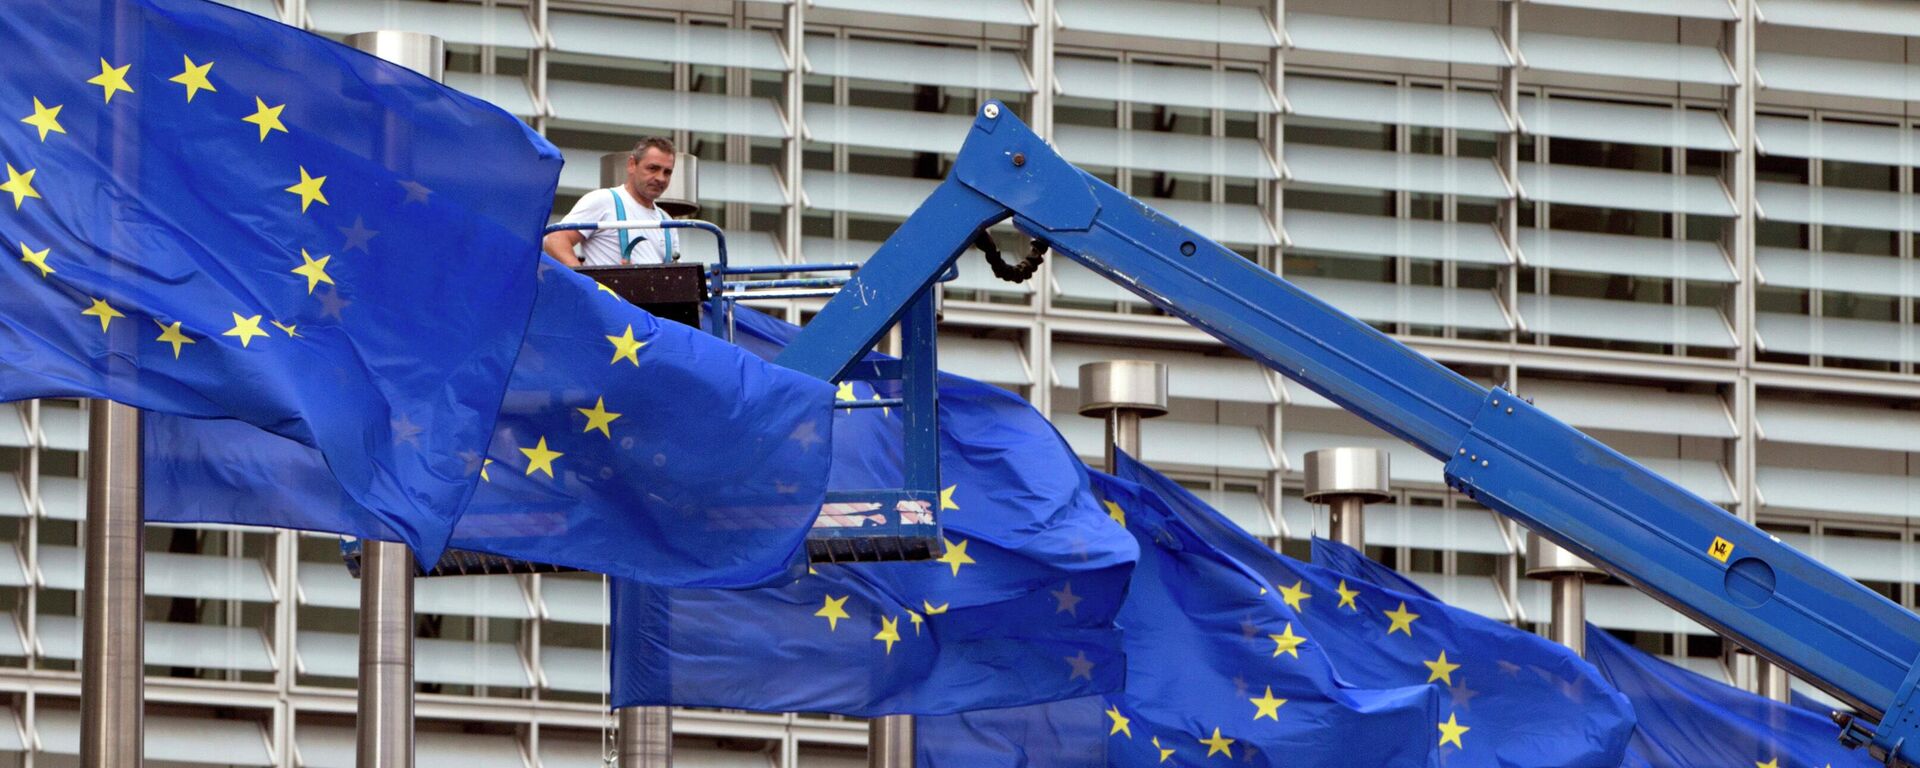 FILE- In this June 23, 2016 file photo, a worker on a lift adjusts the EU flags in front of EU headquarters in Brussels - Sputnik International, 1920, 11.09.2023